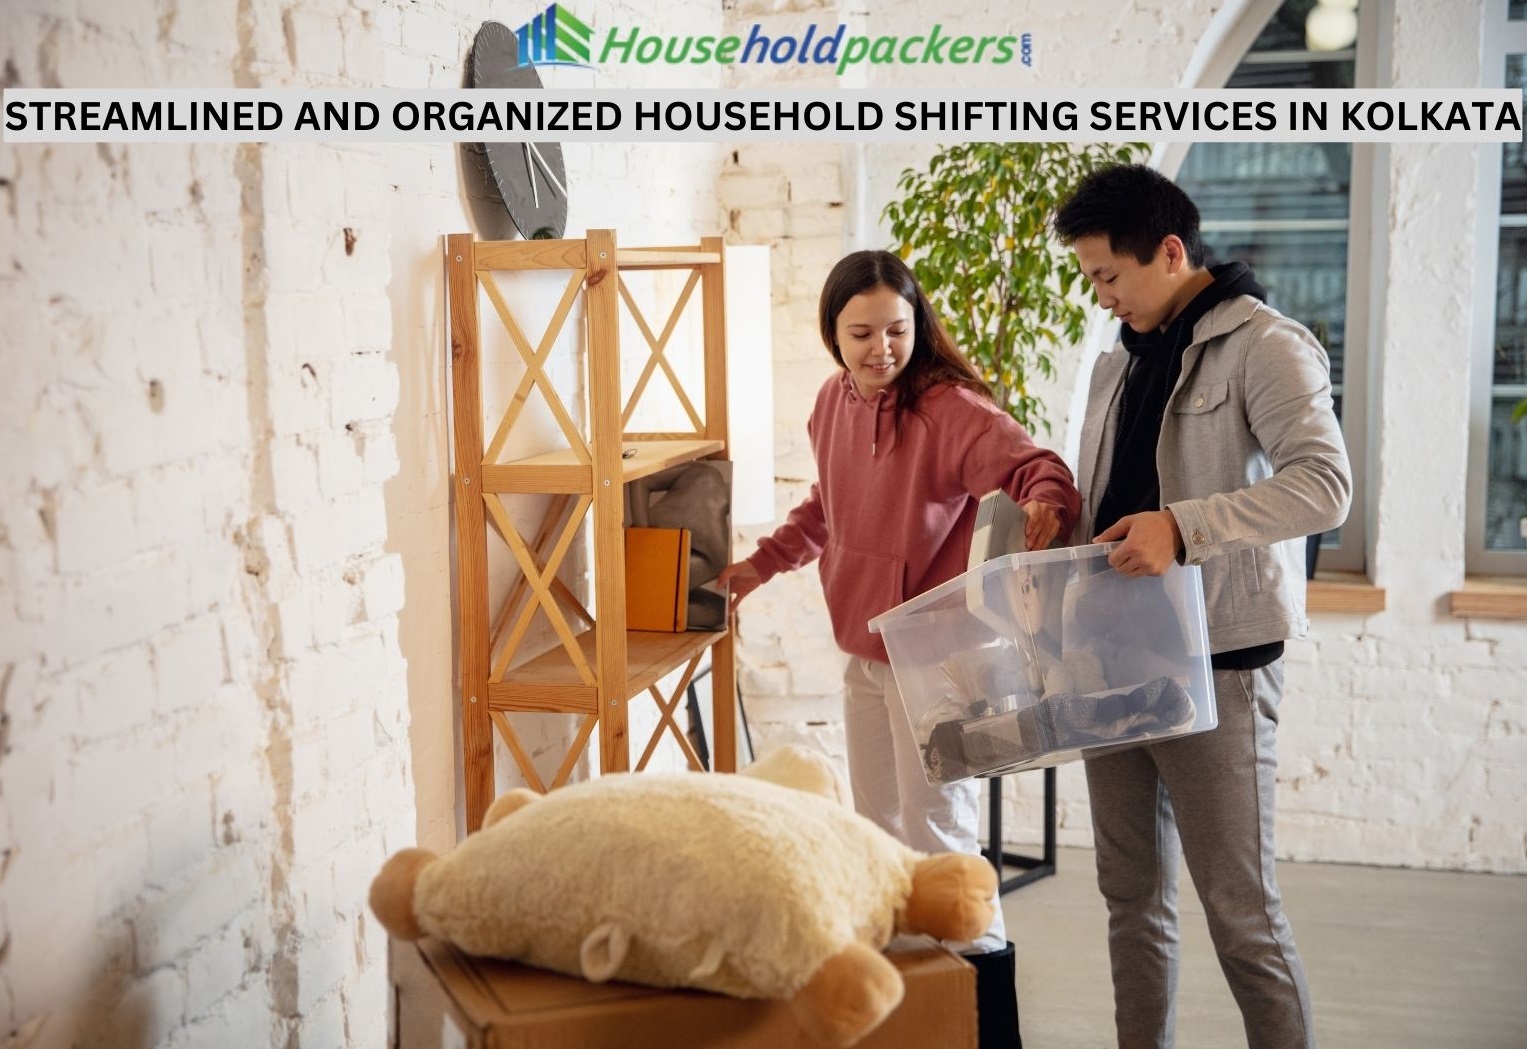 Streamlined and Organized Household Shifting Services in Kolkata